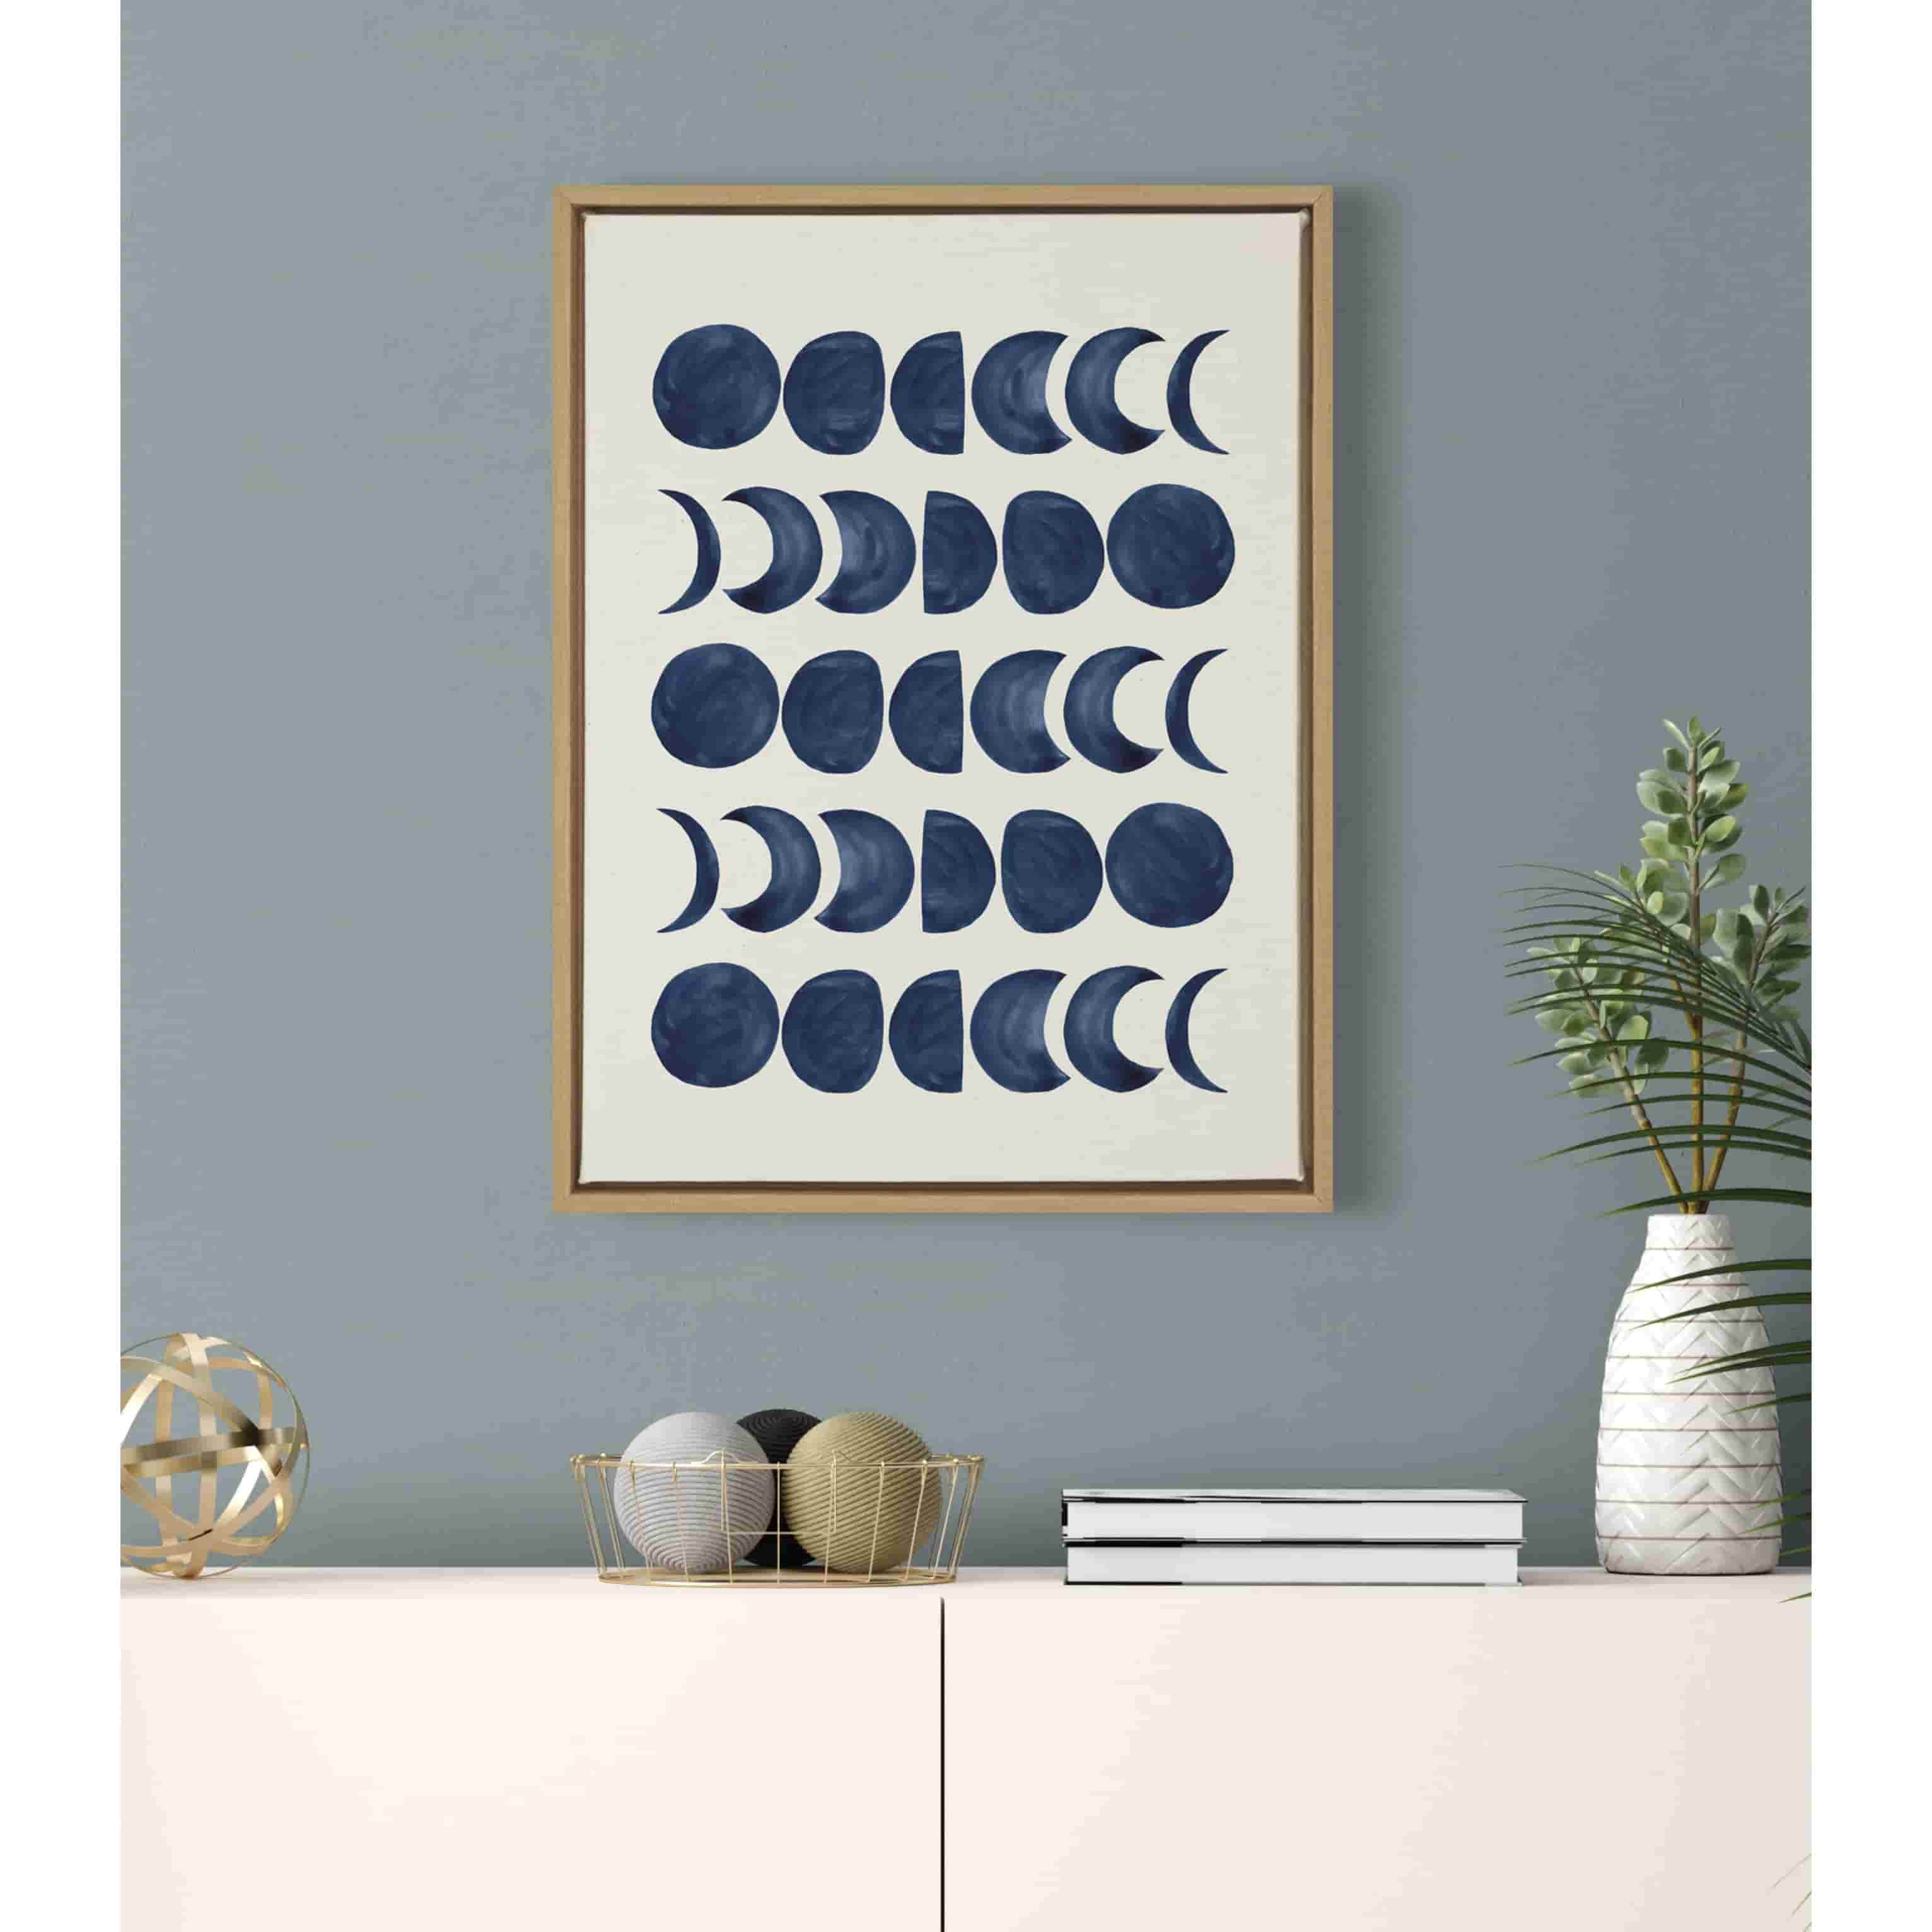 Large framed wall art: Sylvie Linear Moon Phases